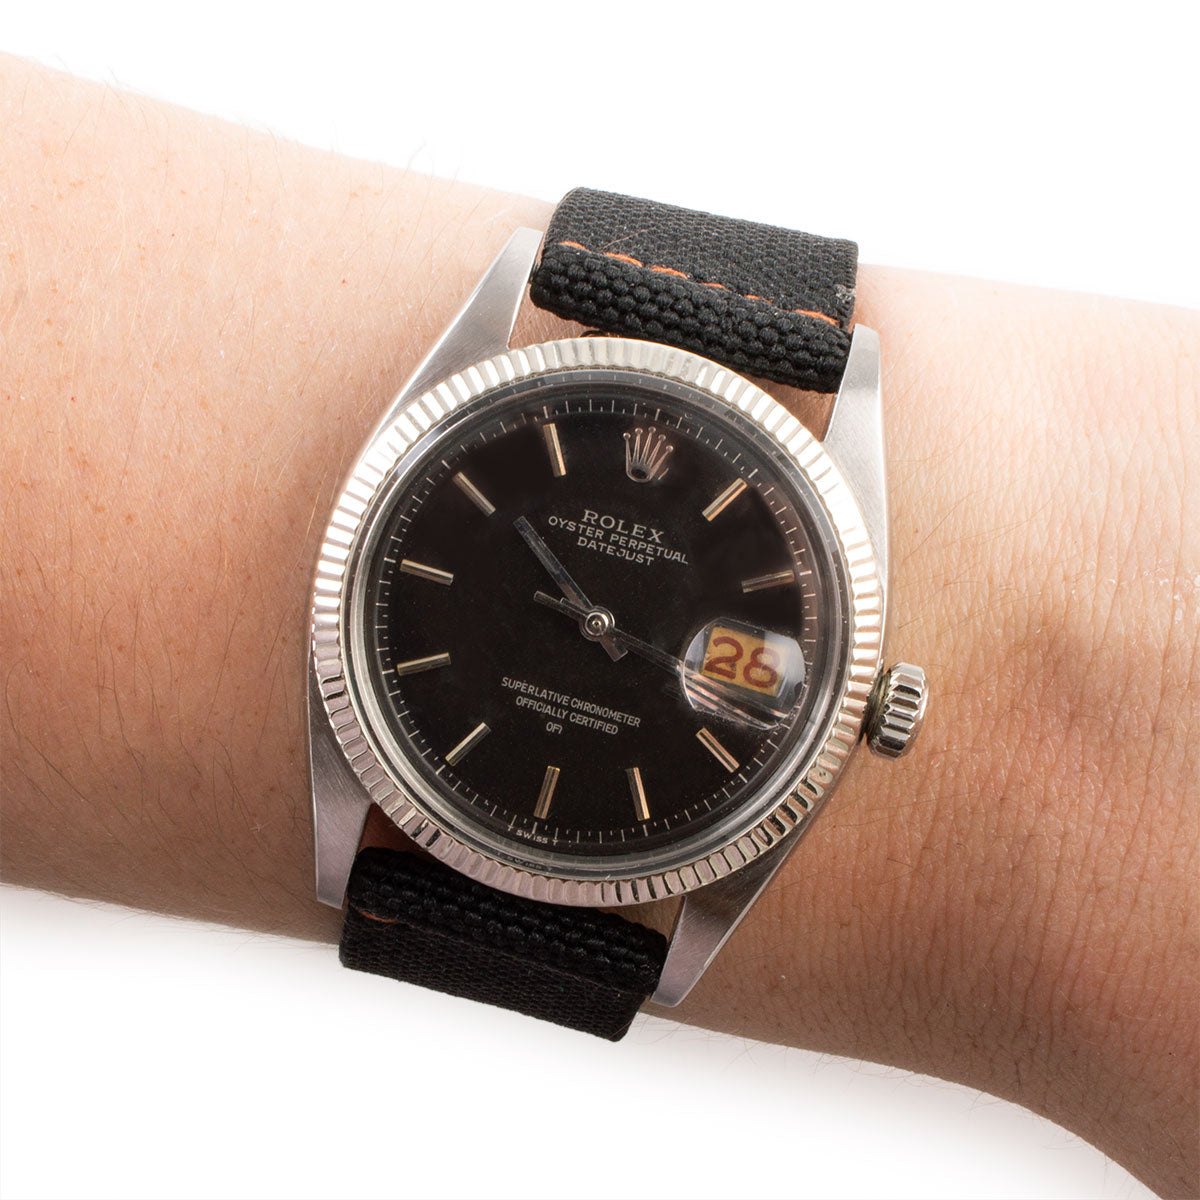 Montre d'occasion - Rolex - Oyster Perpetual Datejust - 4800€